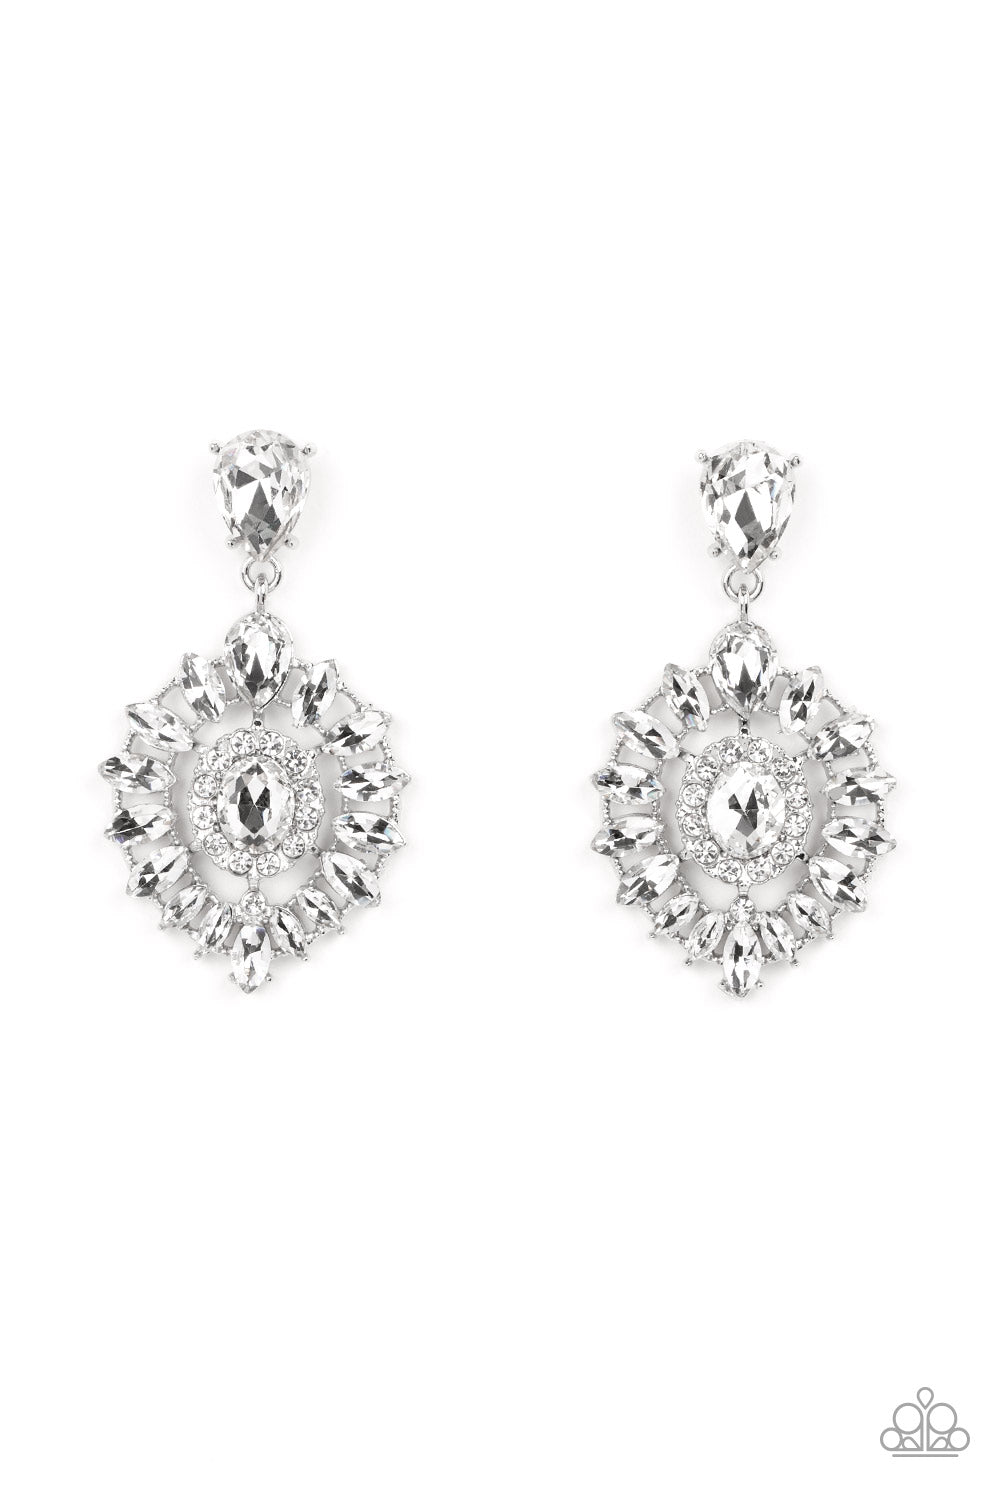 My Good LUXE Charm White Rhinestone Earrings - Paparazzi Accessories- lightbox - CarasShop.com - $5 Jewelry by Cara Jewels